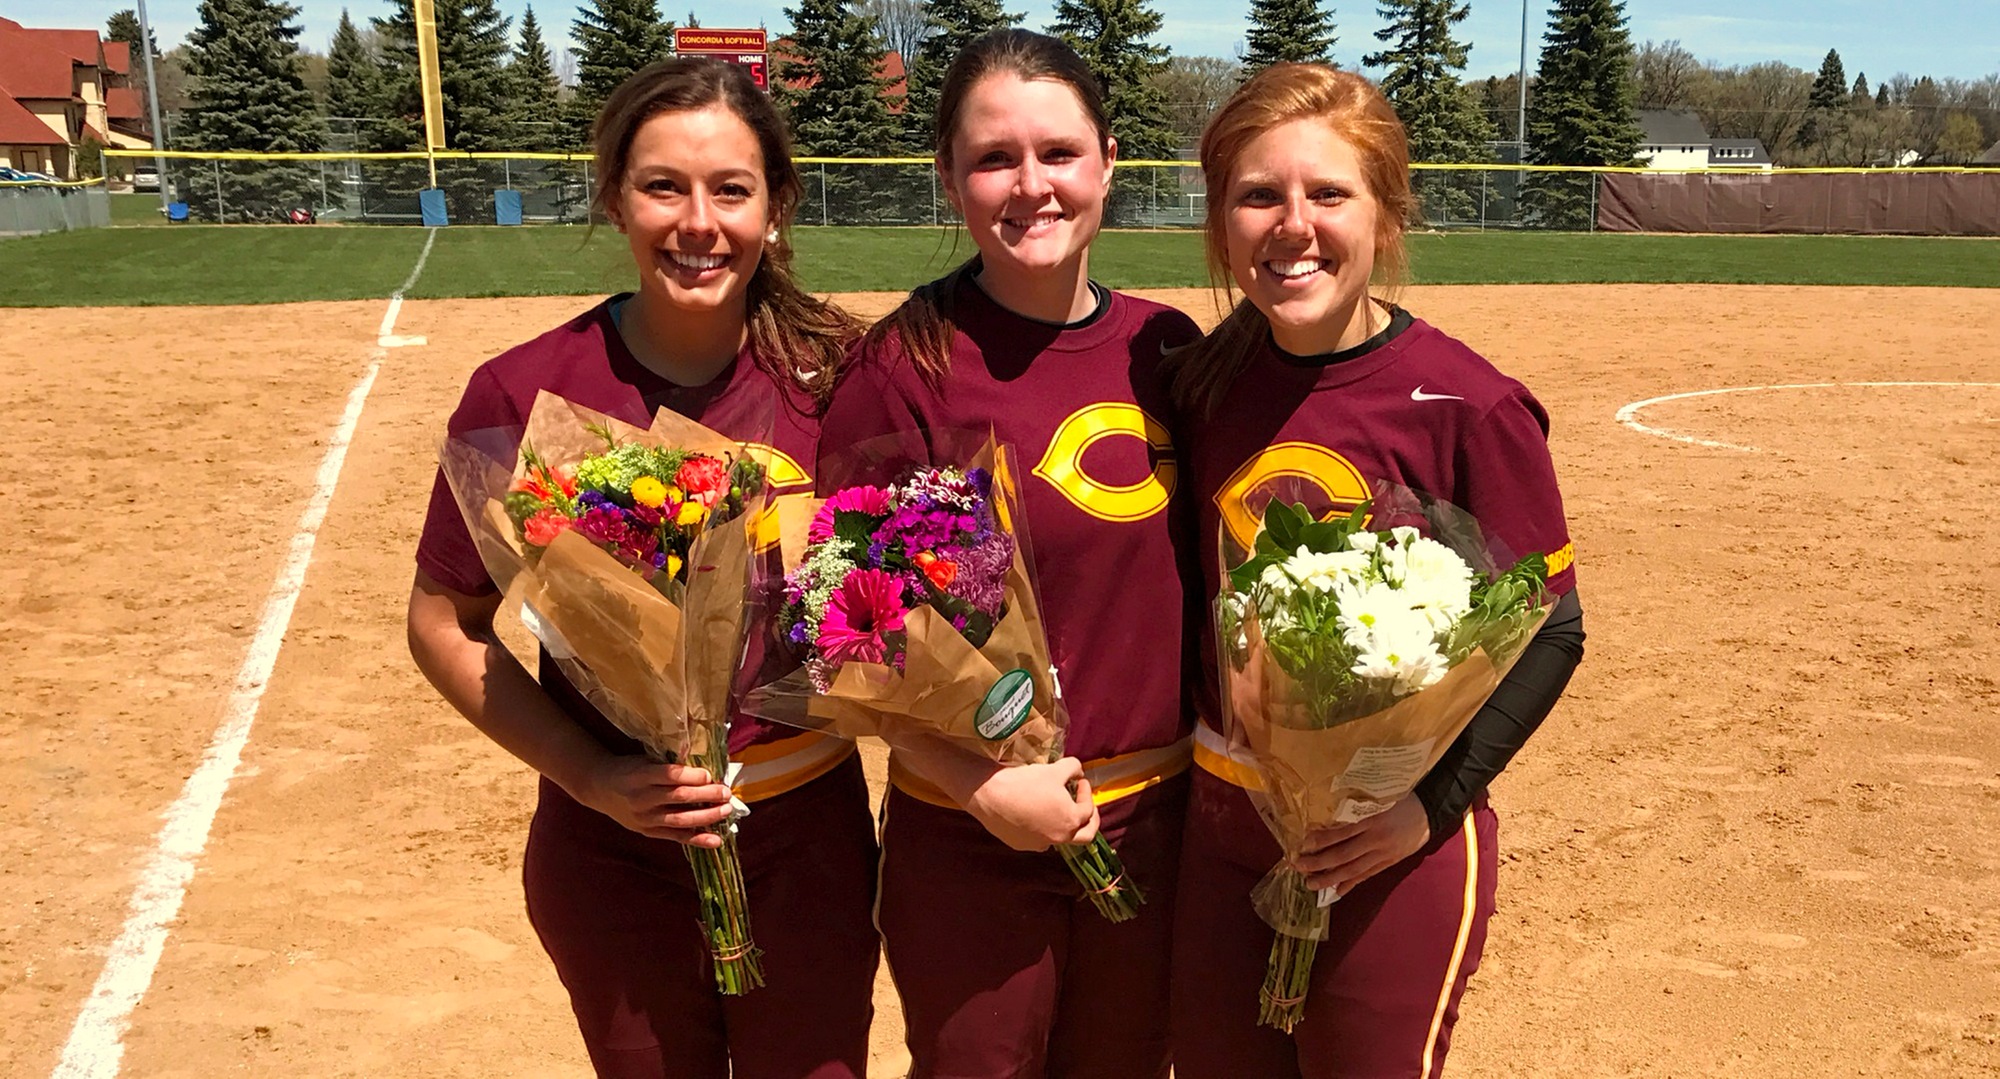 Cobber seniors (L-R) Maddie Little, Gabby Gardner and Taylor Rasmussen combined to go 5-for-10 and drive in three runs in CC's 5-1 win over SMU in Game 1.